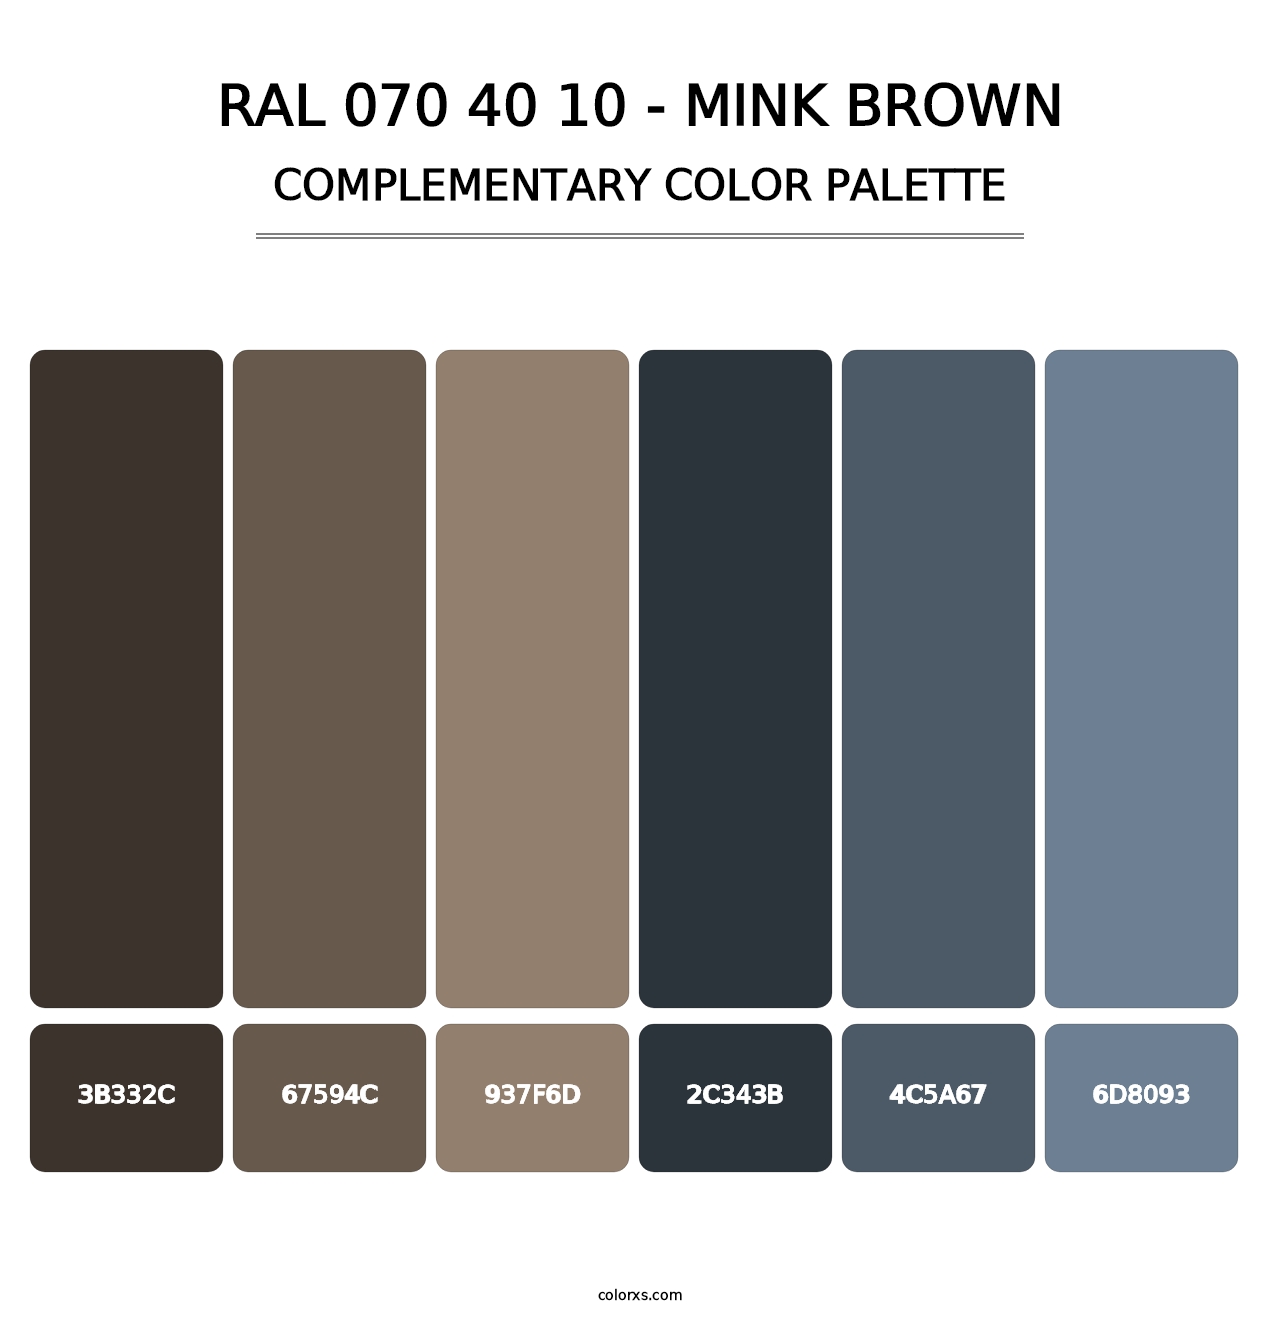 RAL 070 40 10 - Mink Brown - Complementary Color Palette